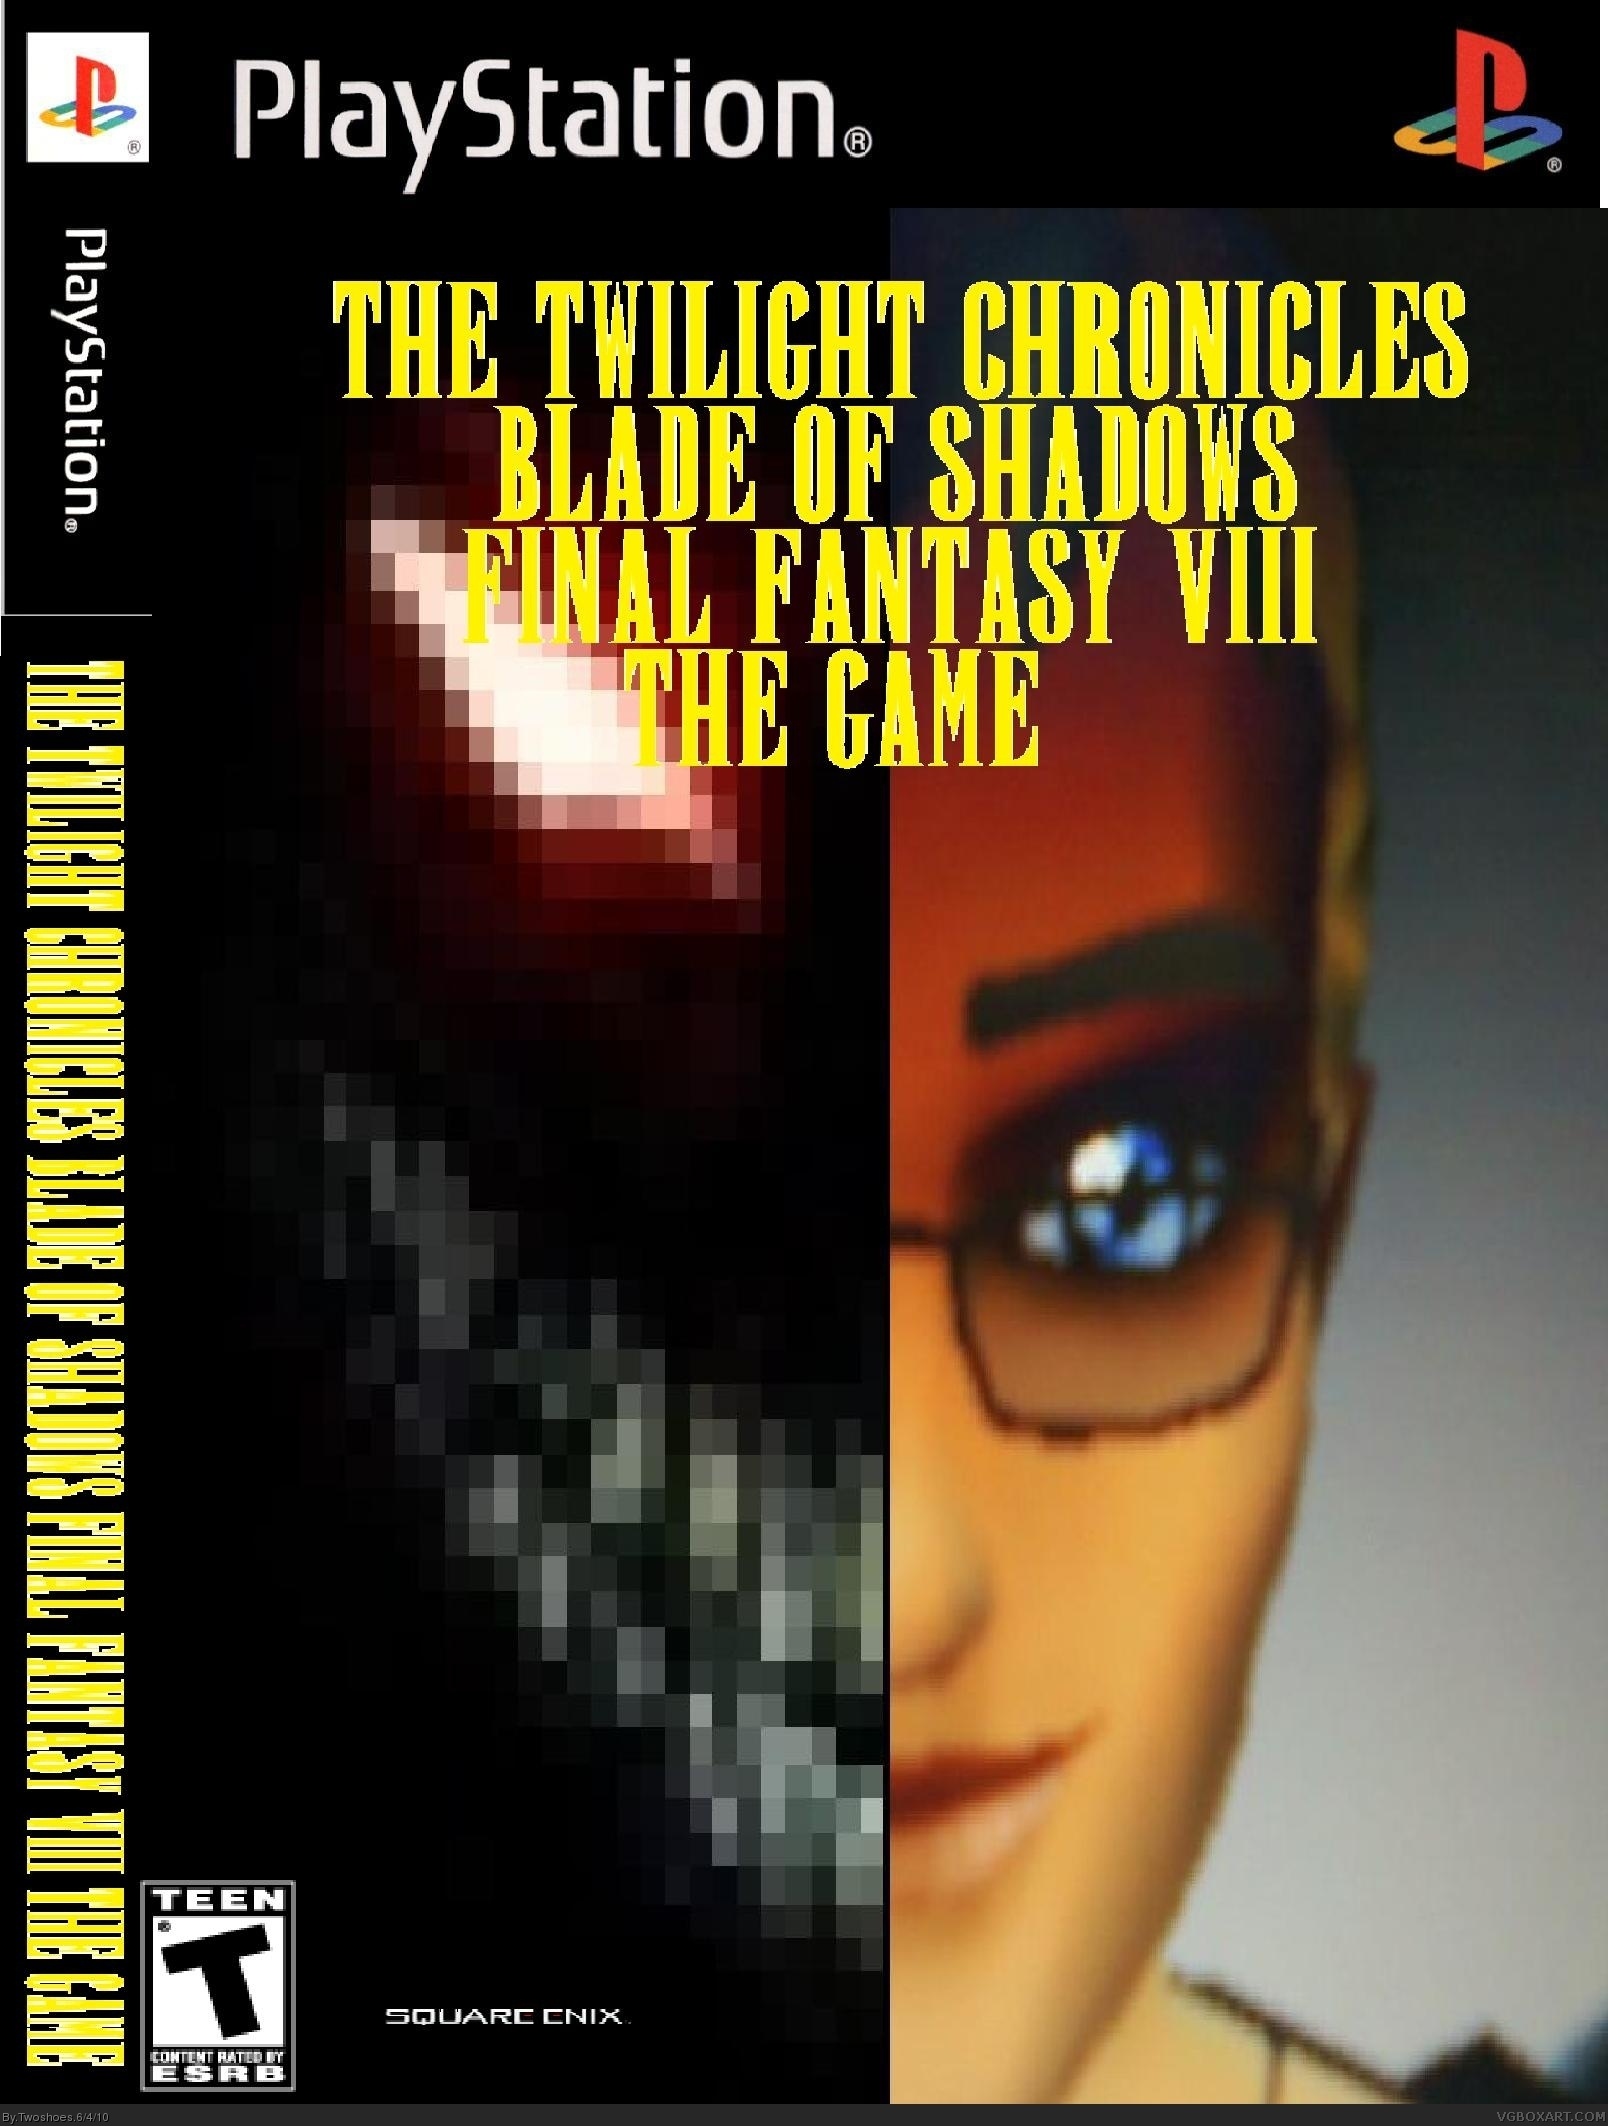 The Twilight Chronicles: Blade Of Shadows FF VIII box cover